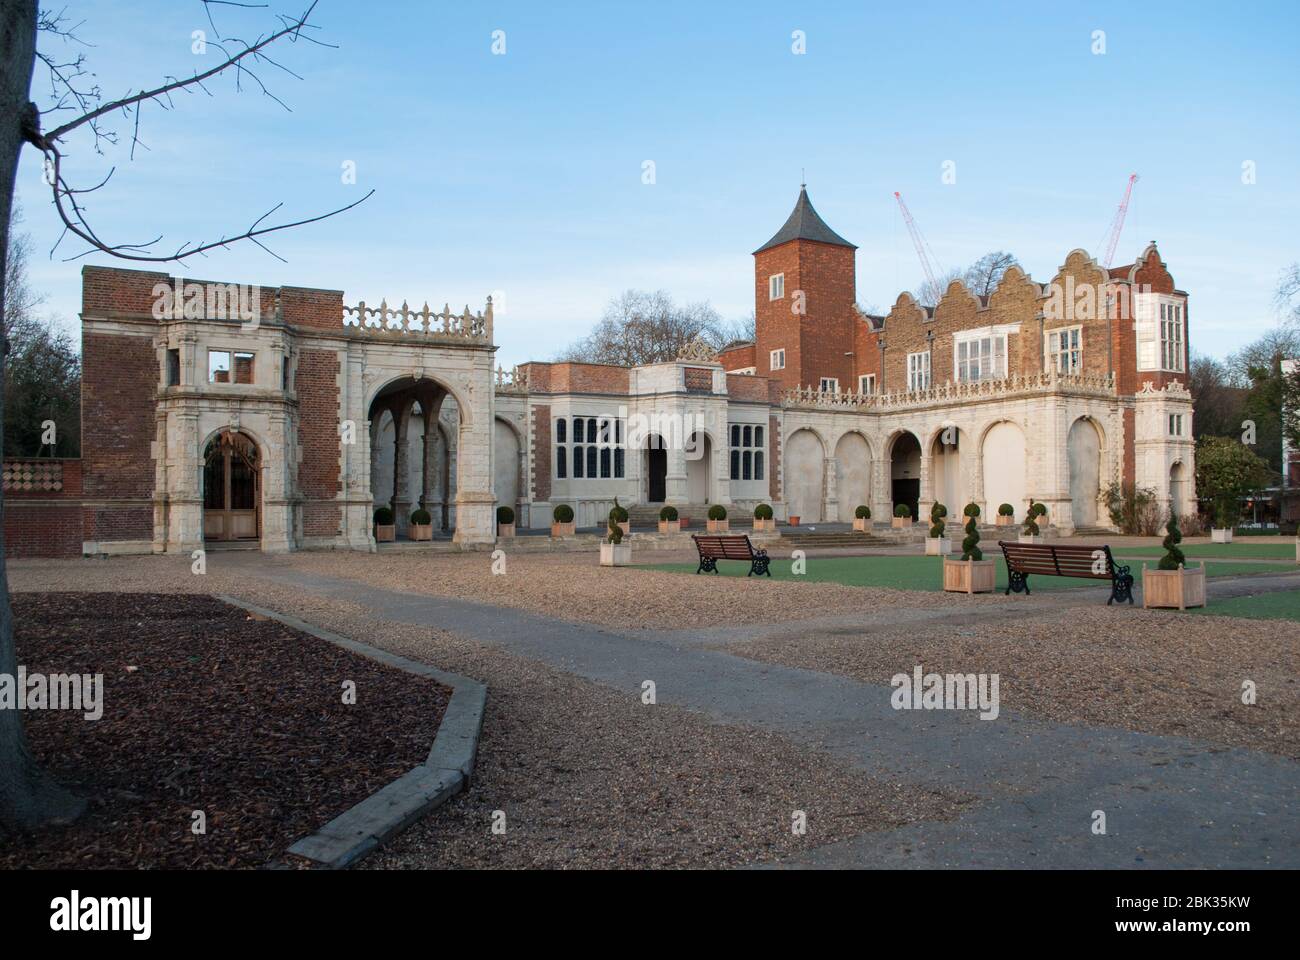 Jacobean Architecture Ruins Old Country House Holland Park Red Brick Stone Palace Holland House, Kensington, London W8 7QU by John Thorpe Stock Photo